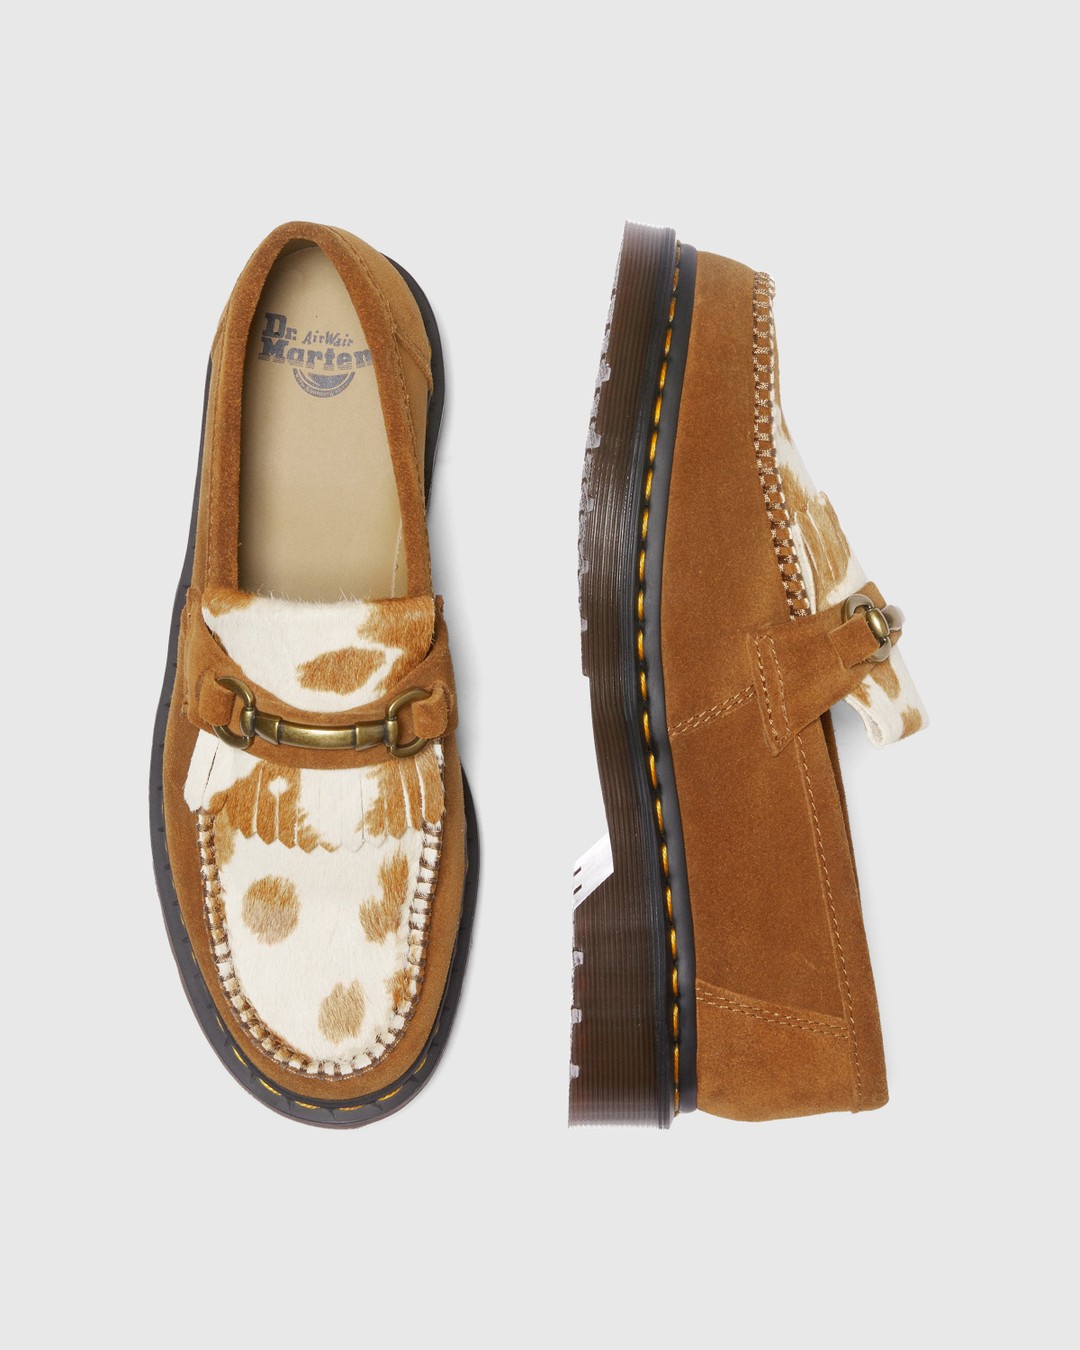 Dr. Martens – Adrian Snaffle Pecan Brown/Jersey Cow Print - Shoes - Brown - Image 4